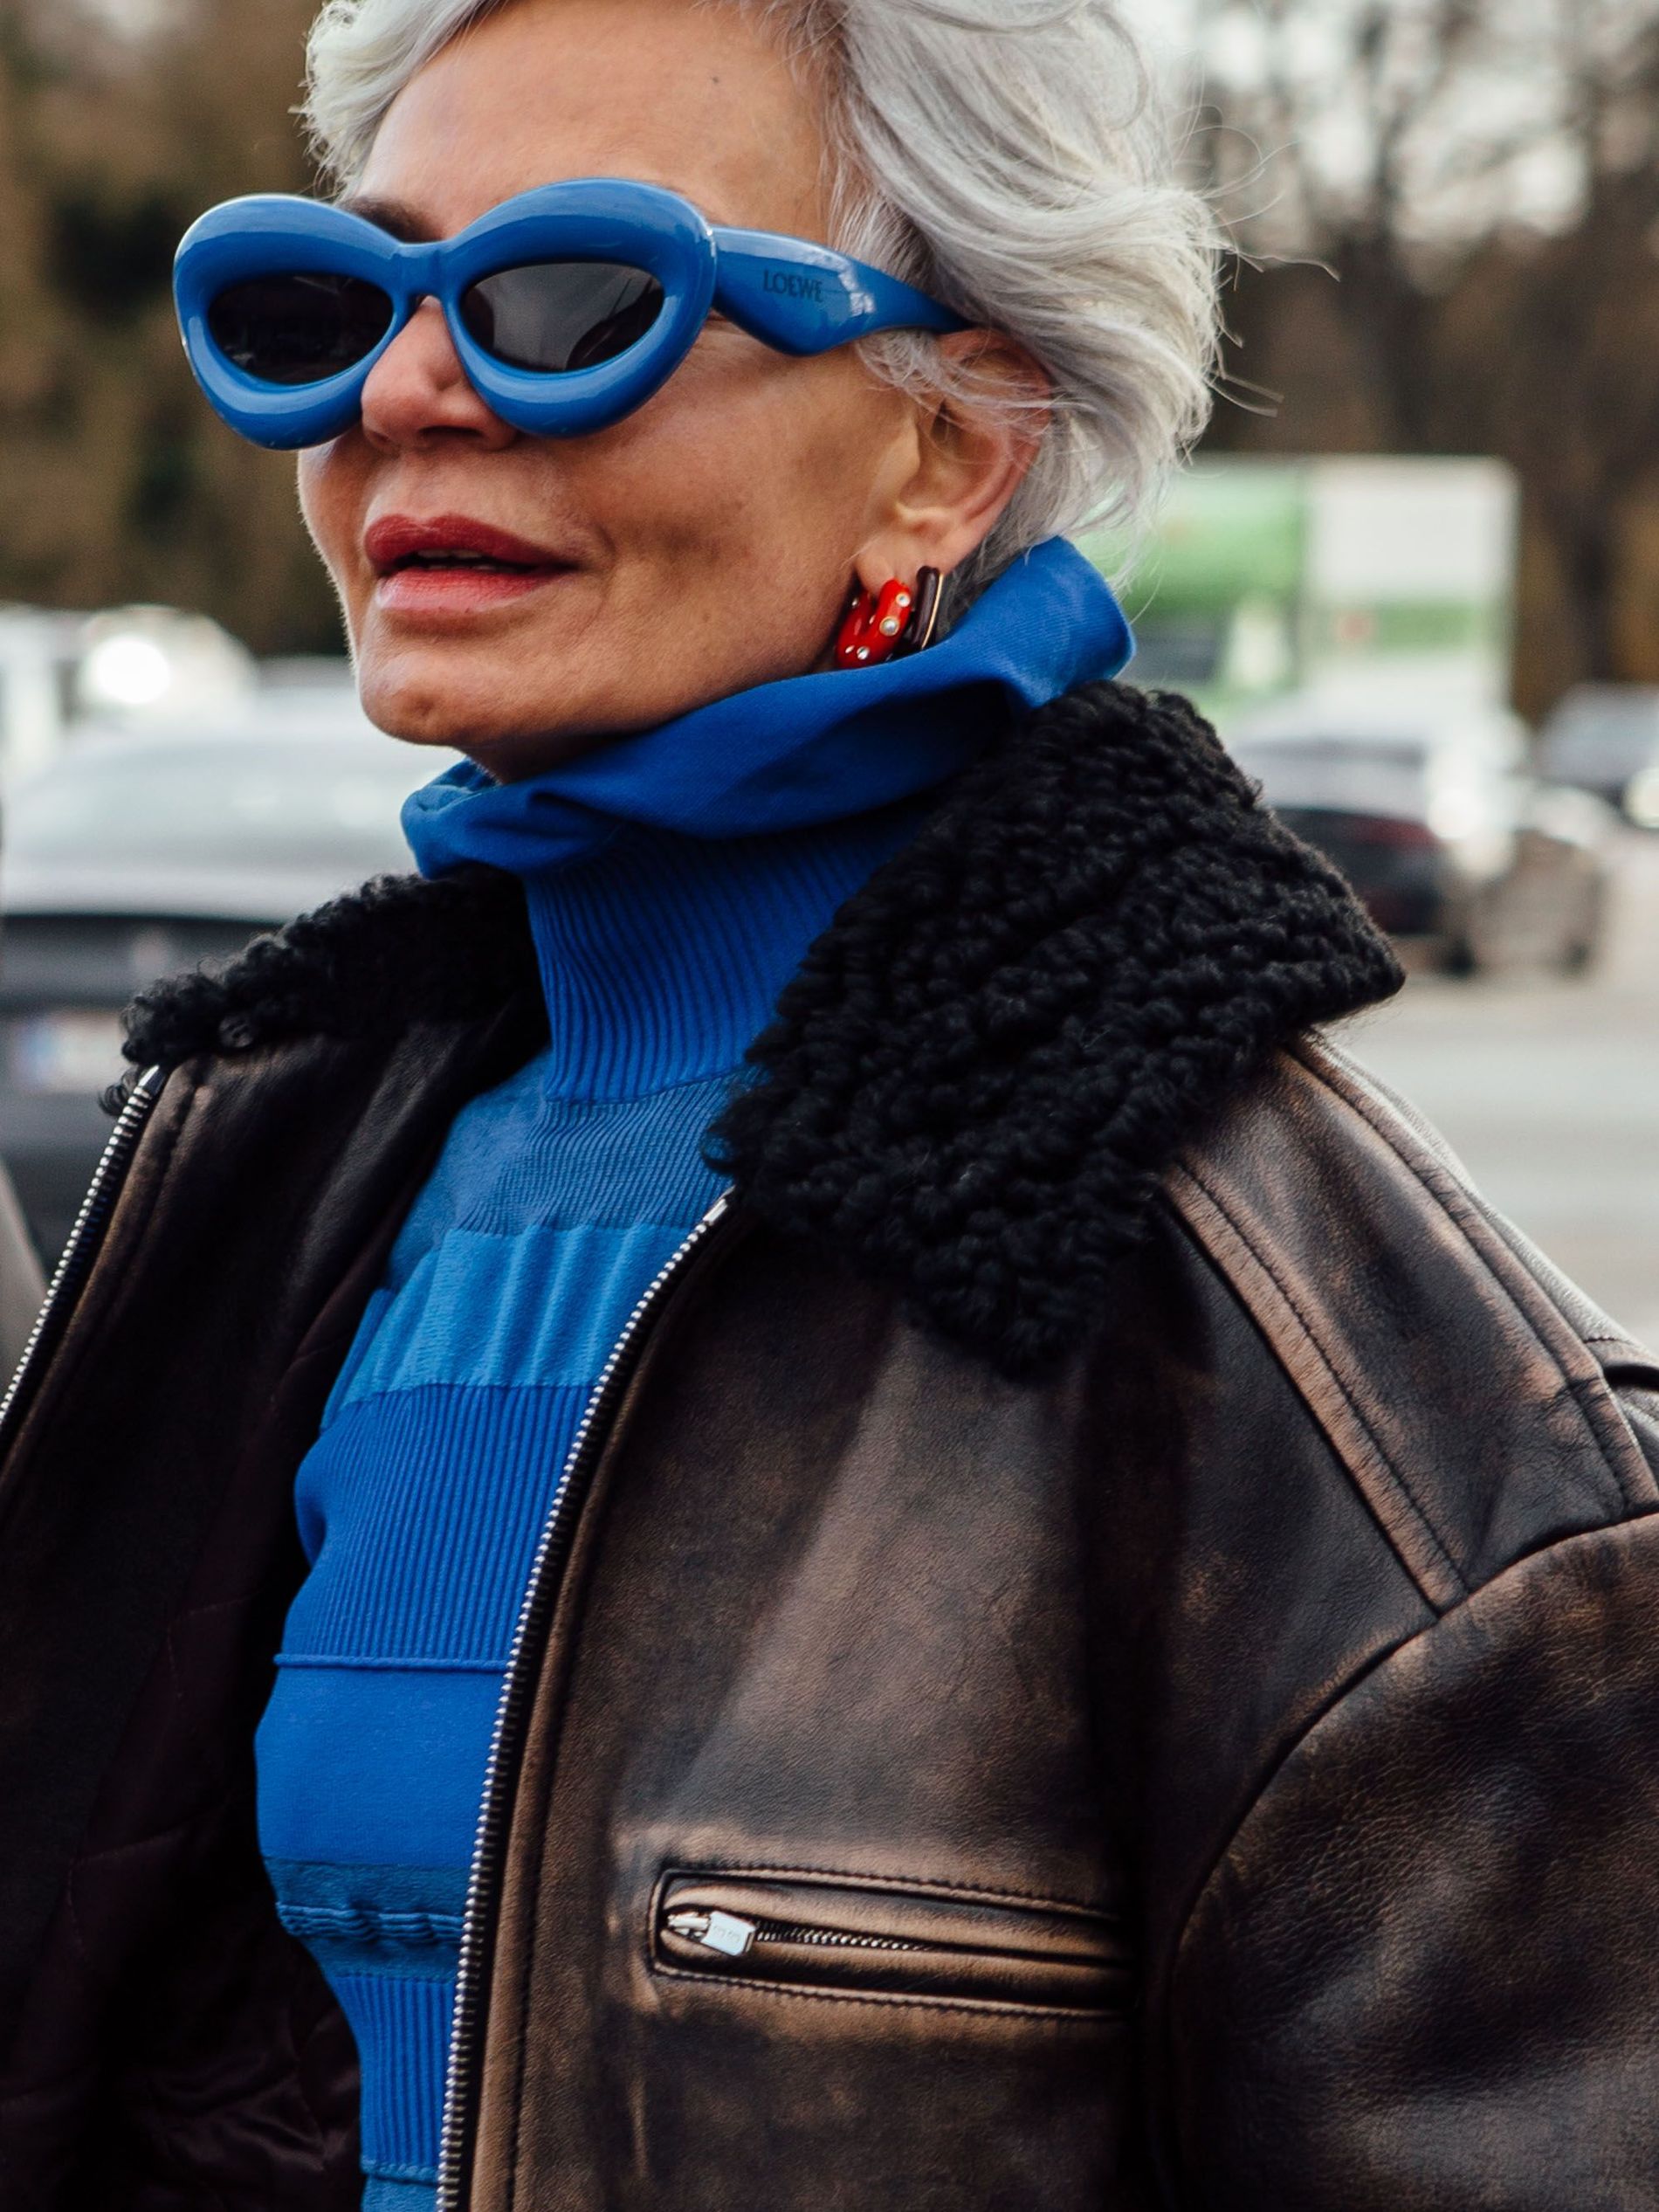 Guest wears blur Loewe bubble sunglasses with matching knitted top and an aviator jacket